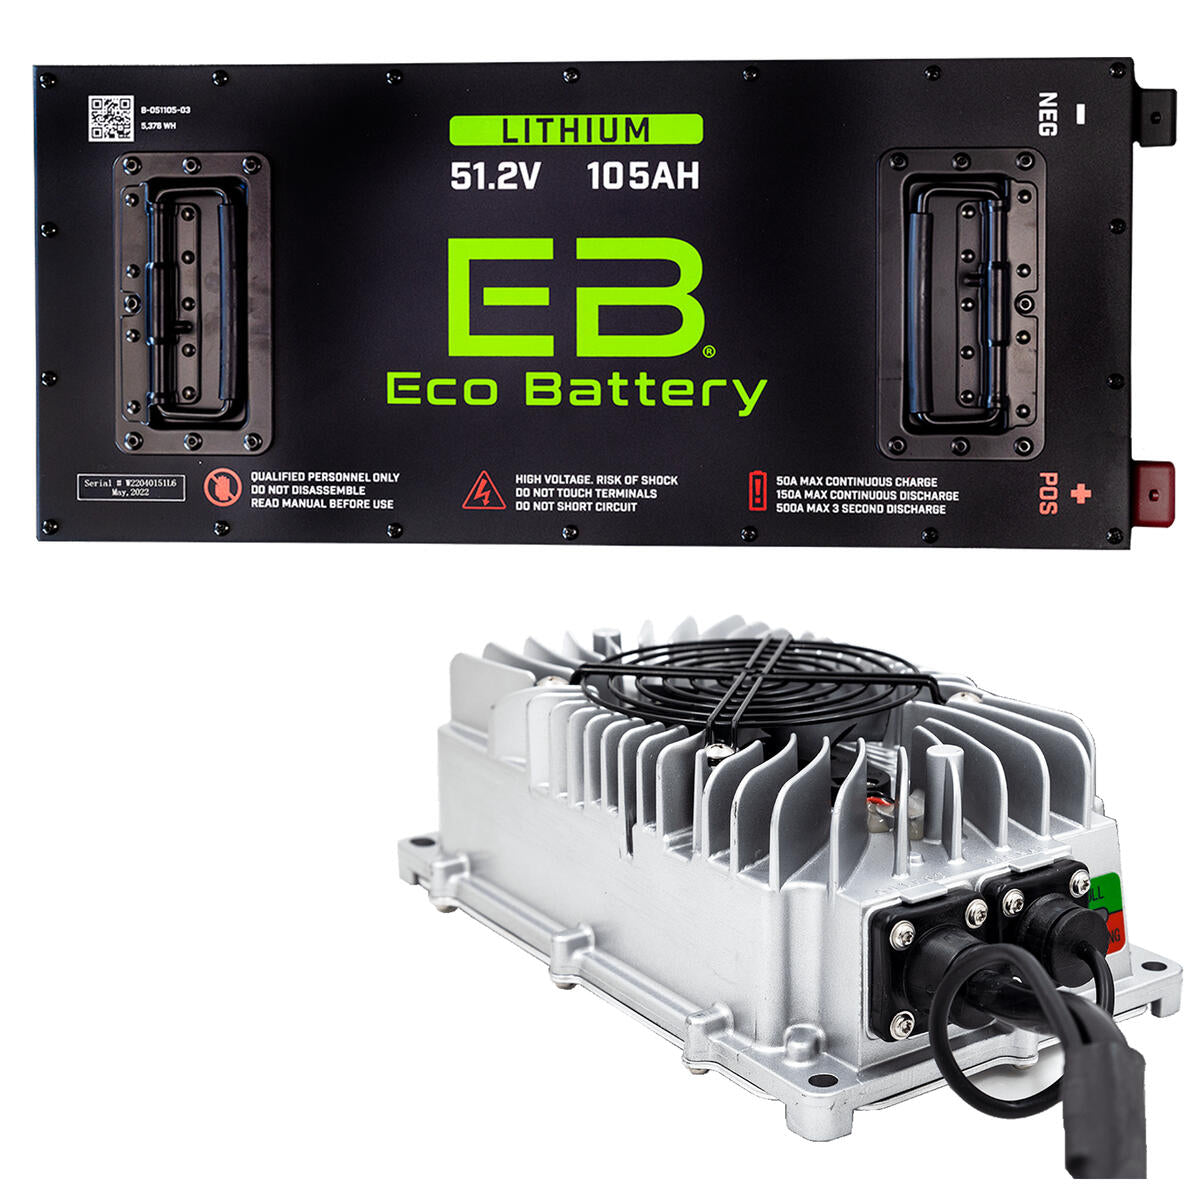 51V 105AH Eco LifePo4 Lithium Battery Kit with Charger - Skinny Style Battery 25-153